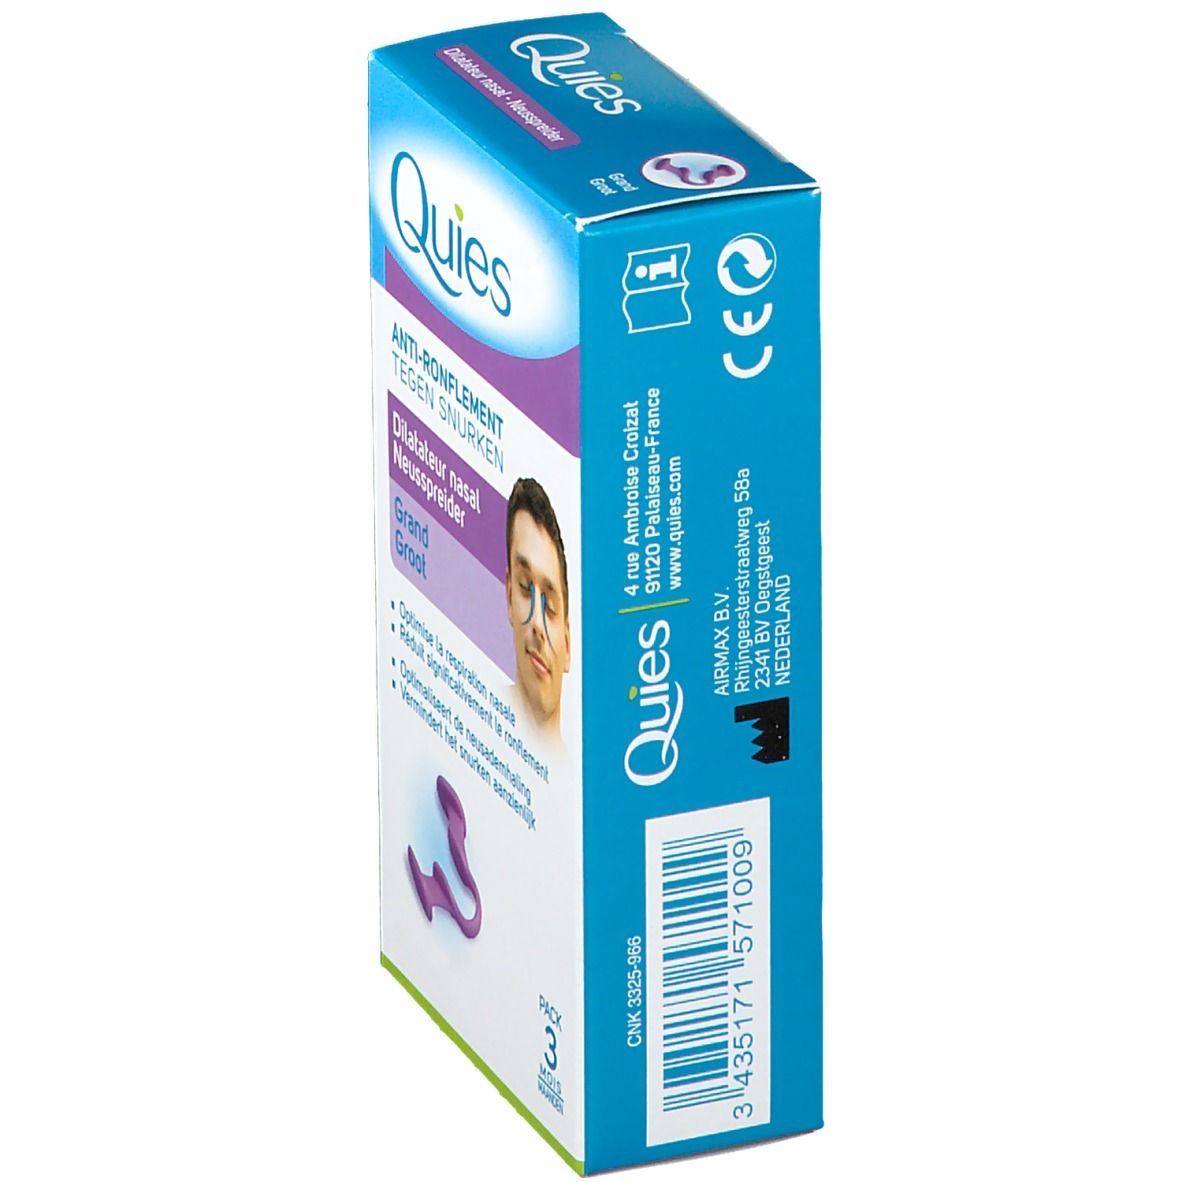 Quies dilatateur nasal anti-ronflement grade taille